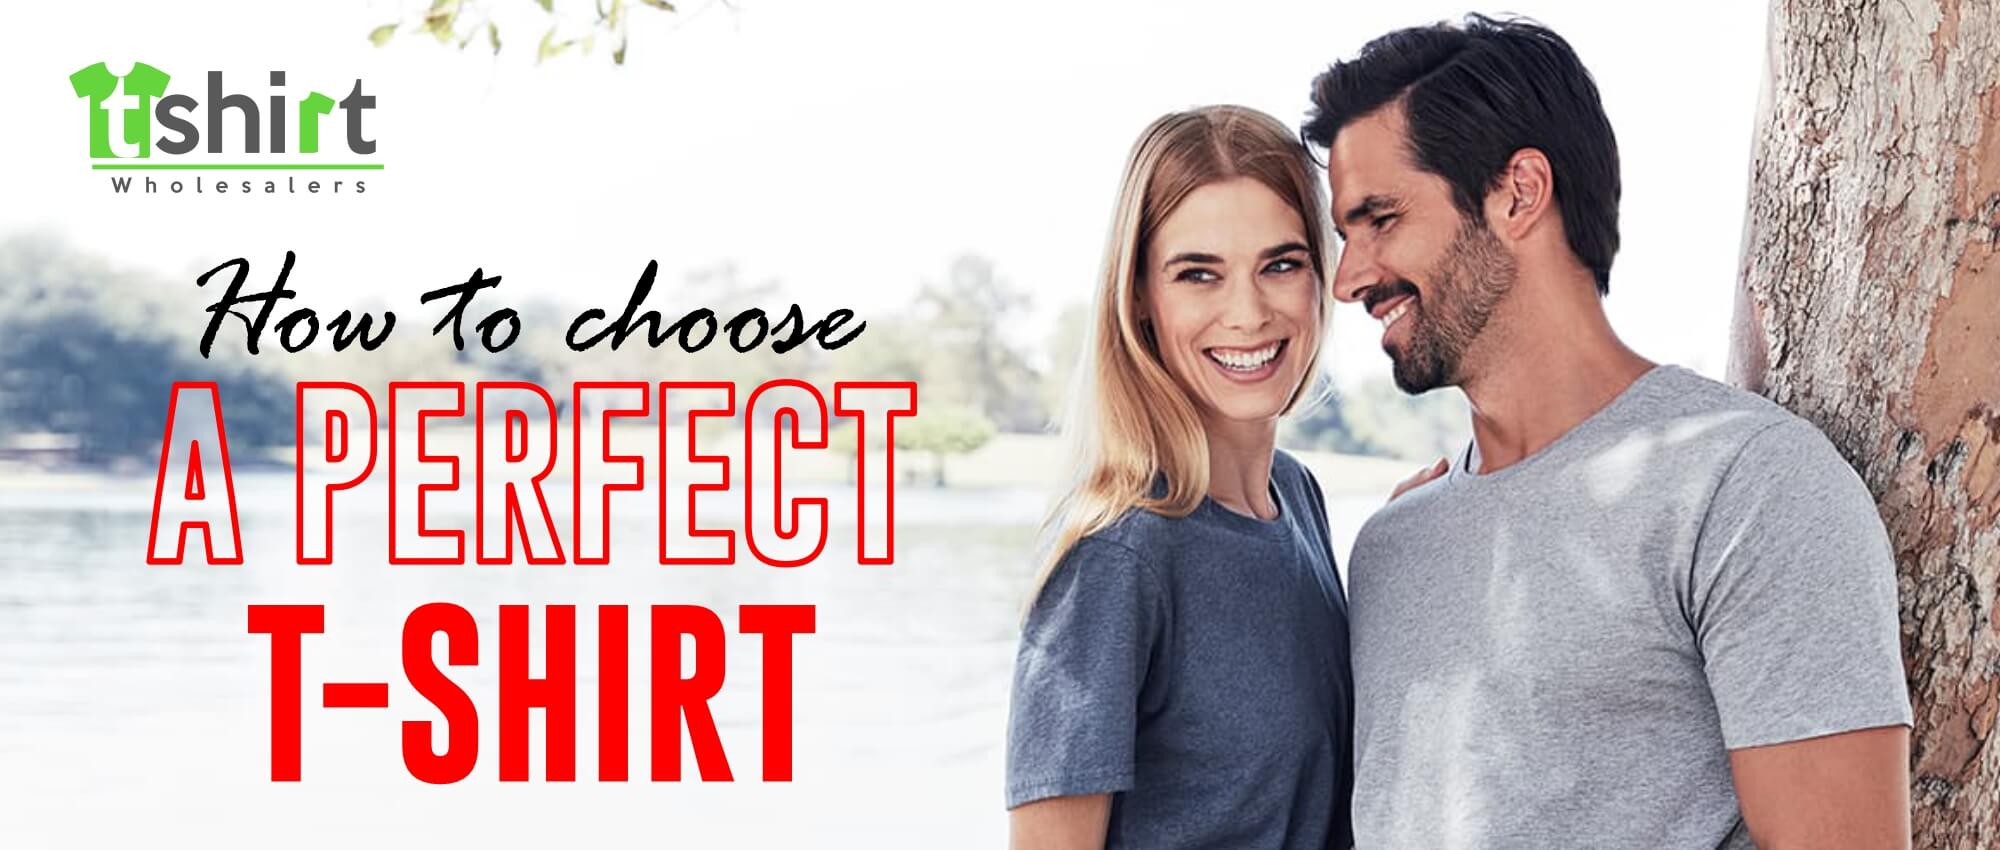 HOW TO CHOOSE A PERFECT T-SHIRT